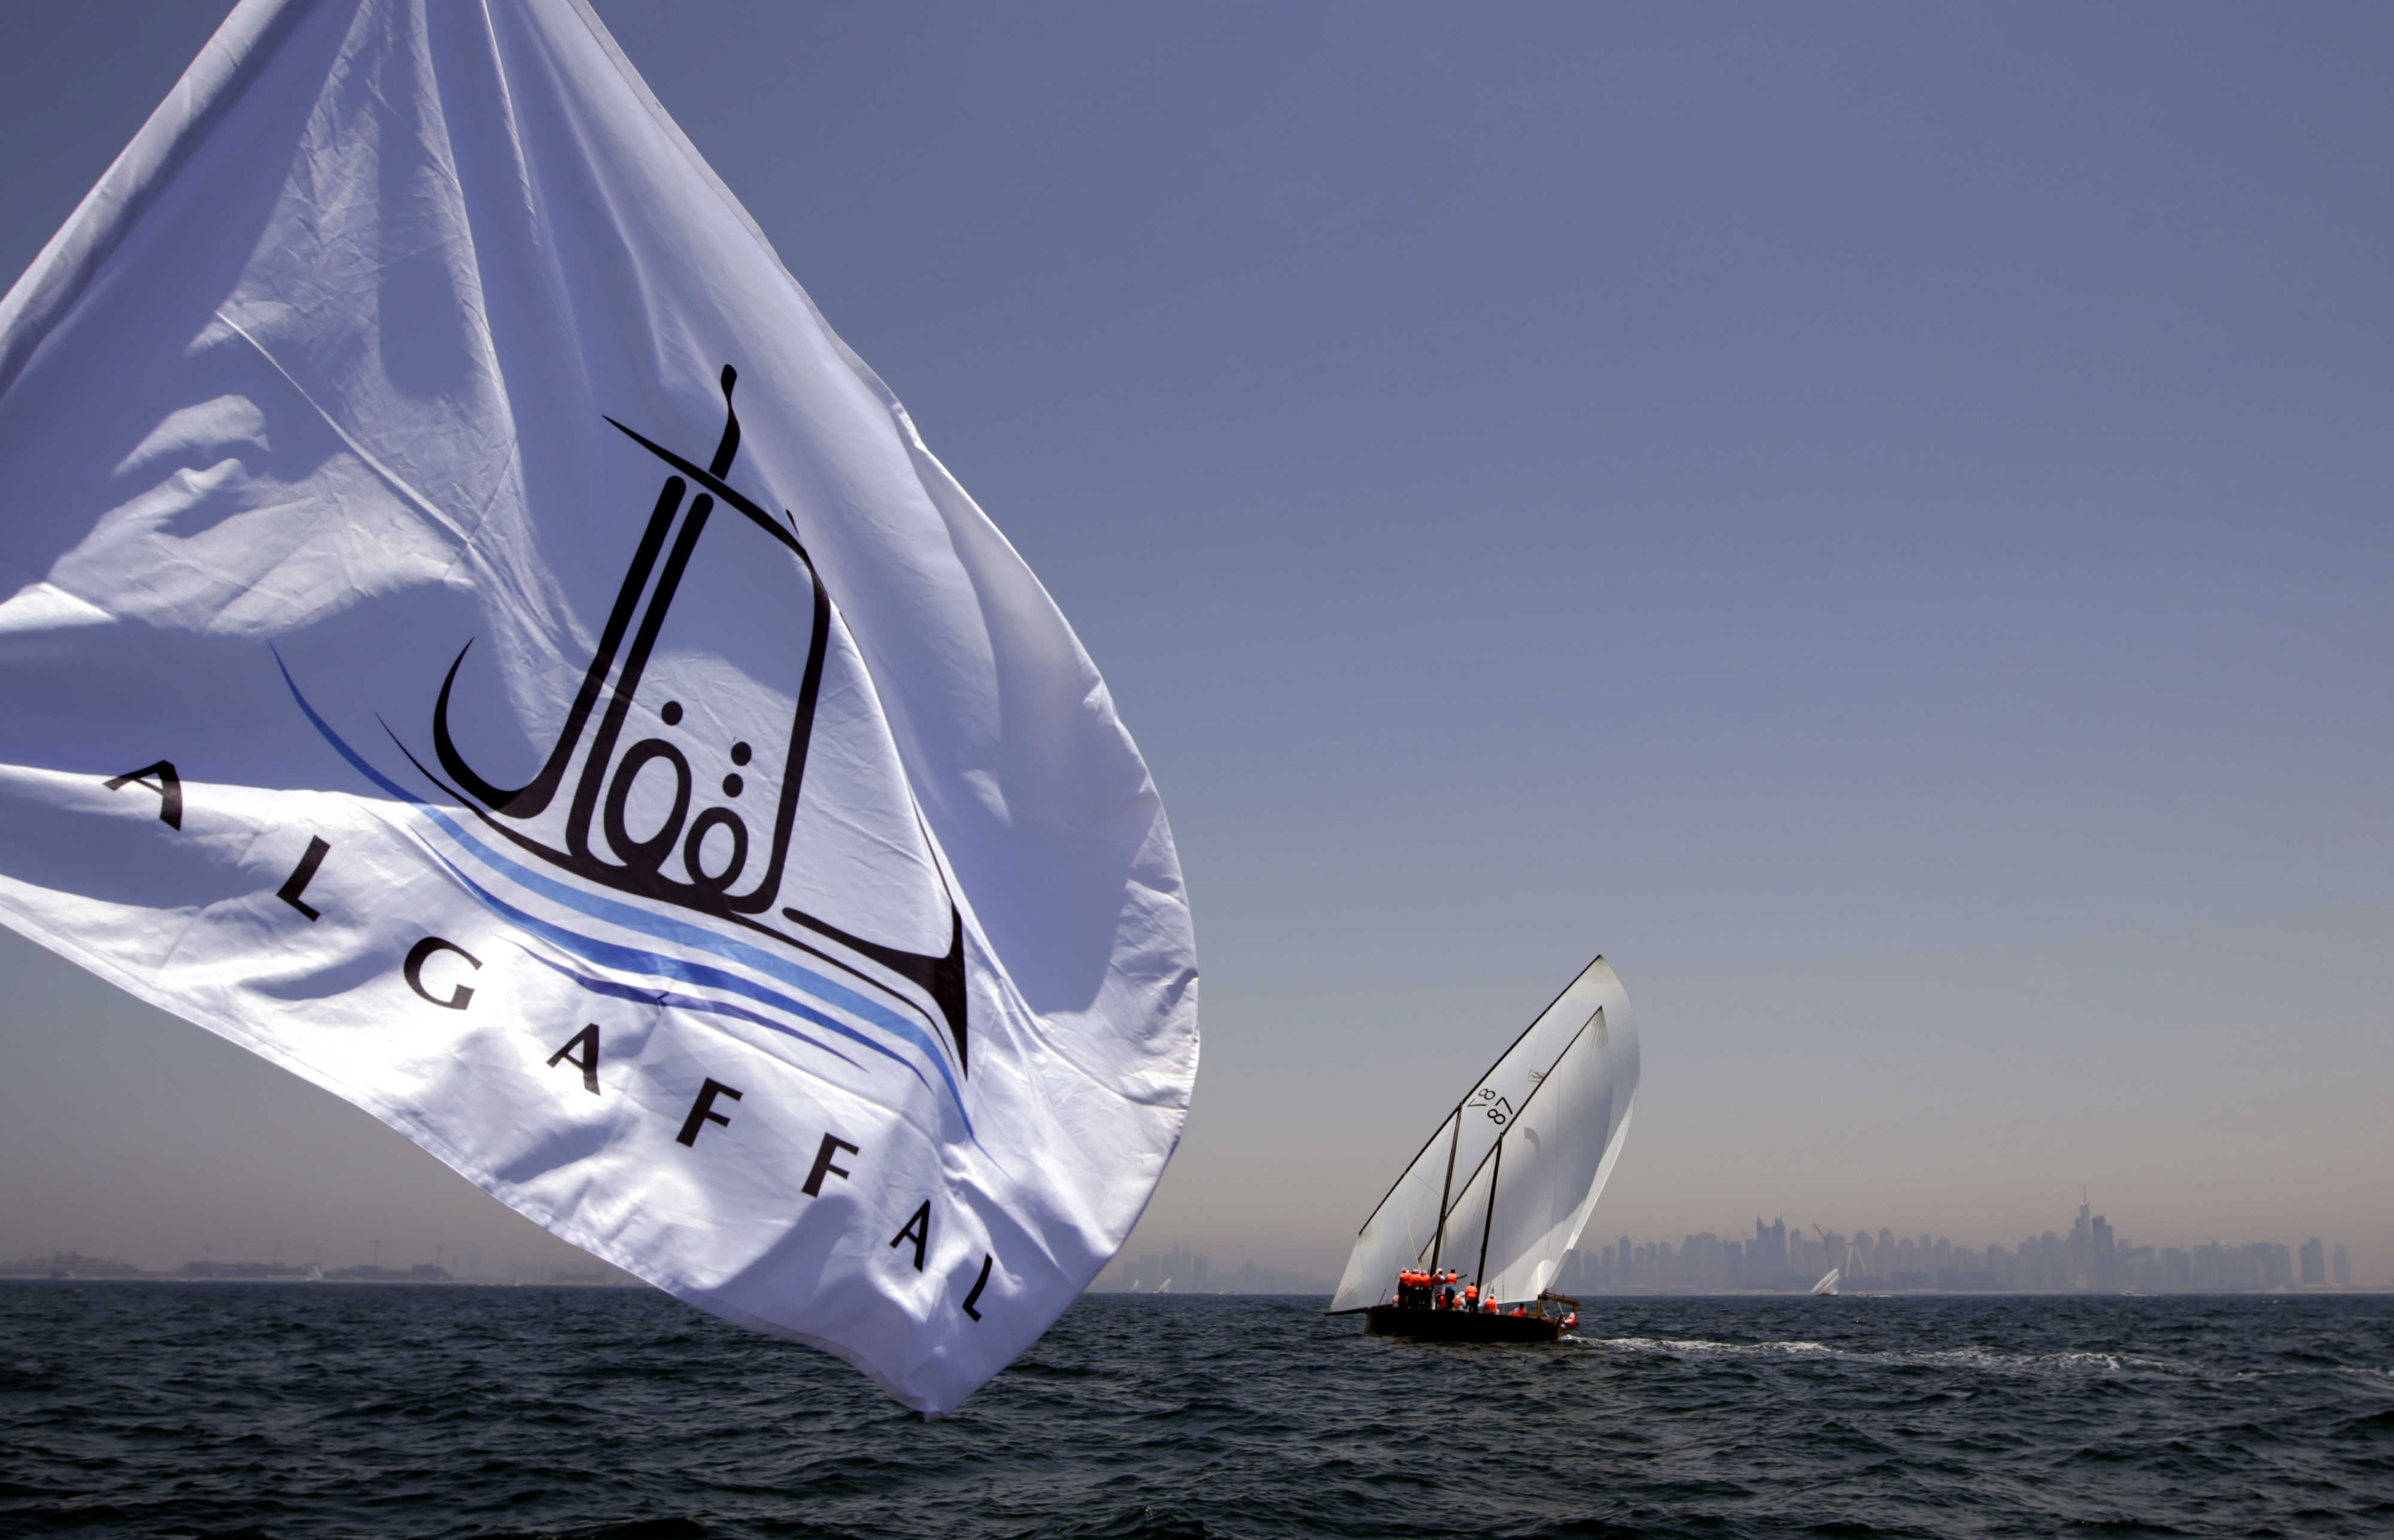 32nd Al Gaffal Long Distance Race to be held from 26 to 28 May